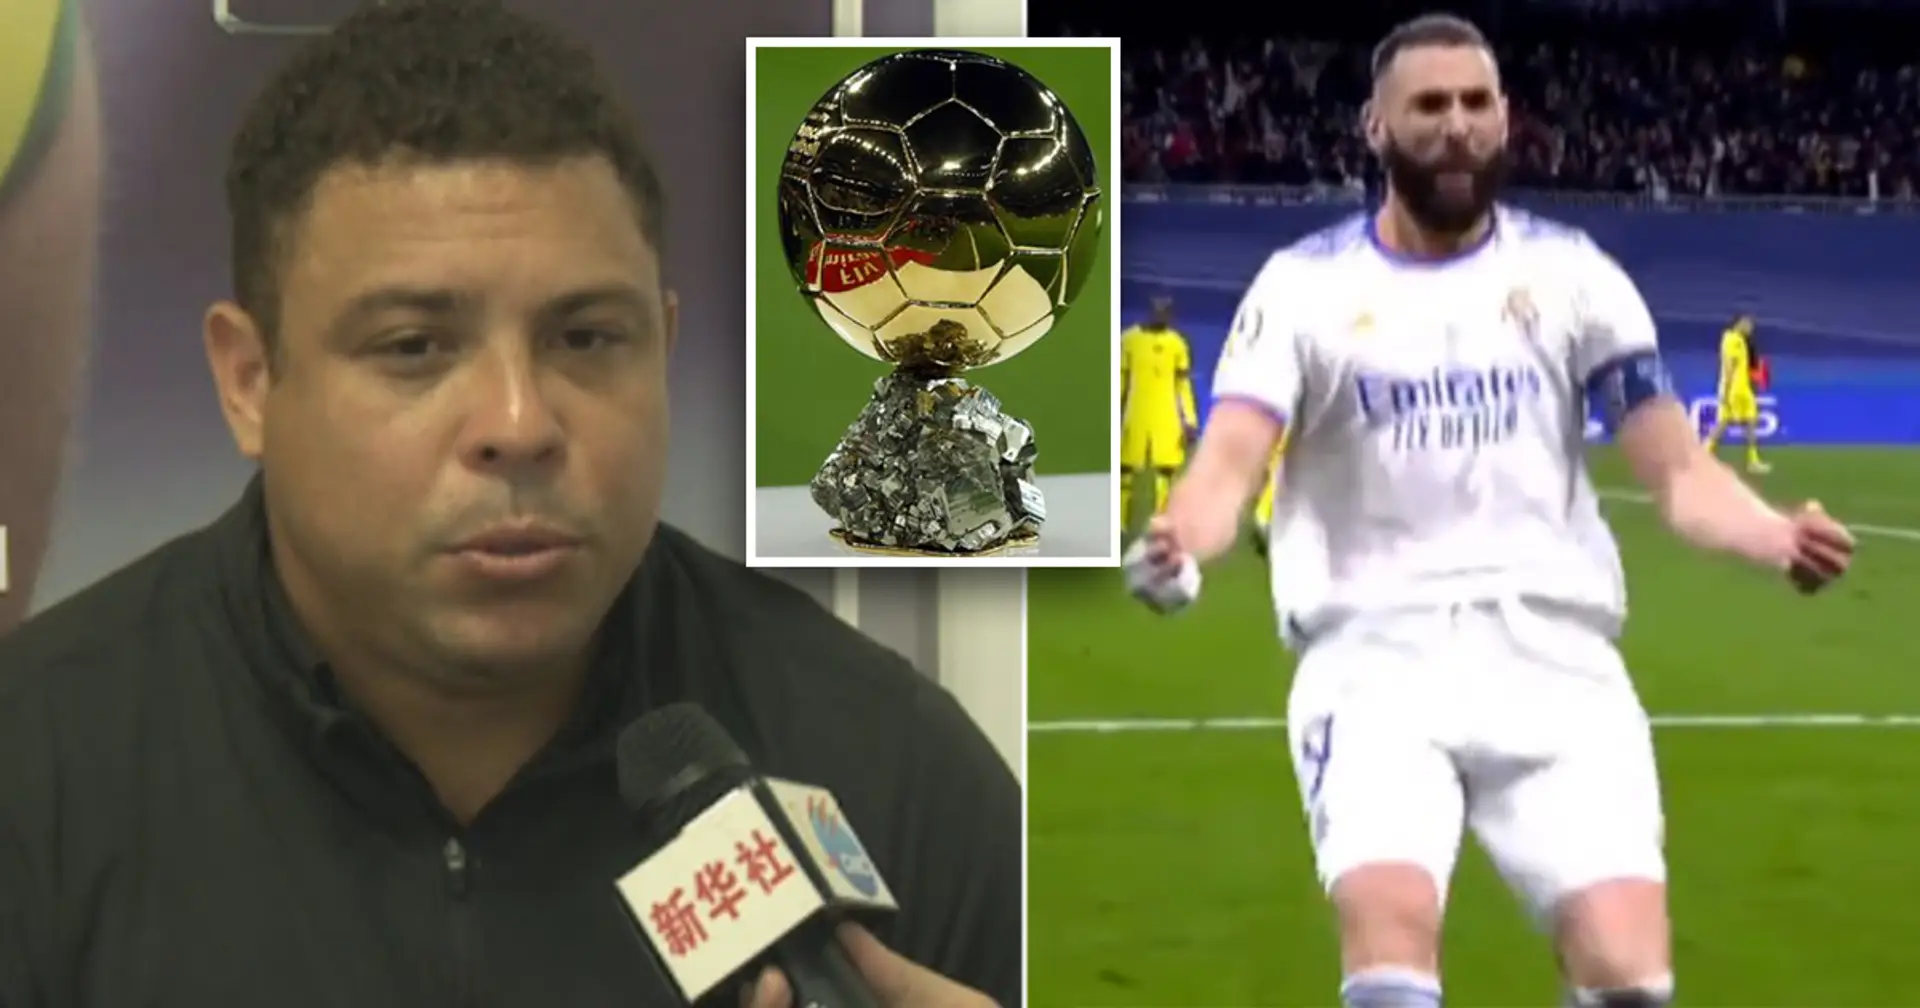 'I've been saying this for years and getting criticised': Ronaldo Nazario on Benzema's Ballon d'Or chances